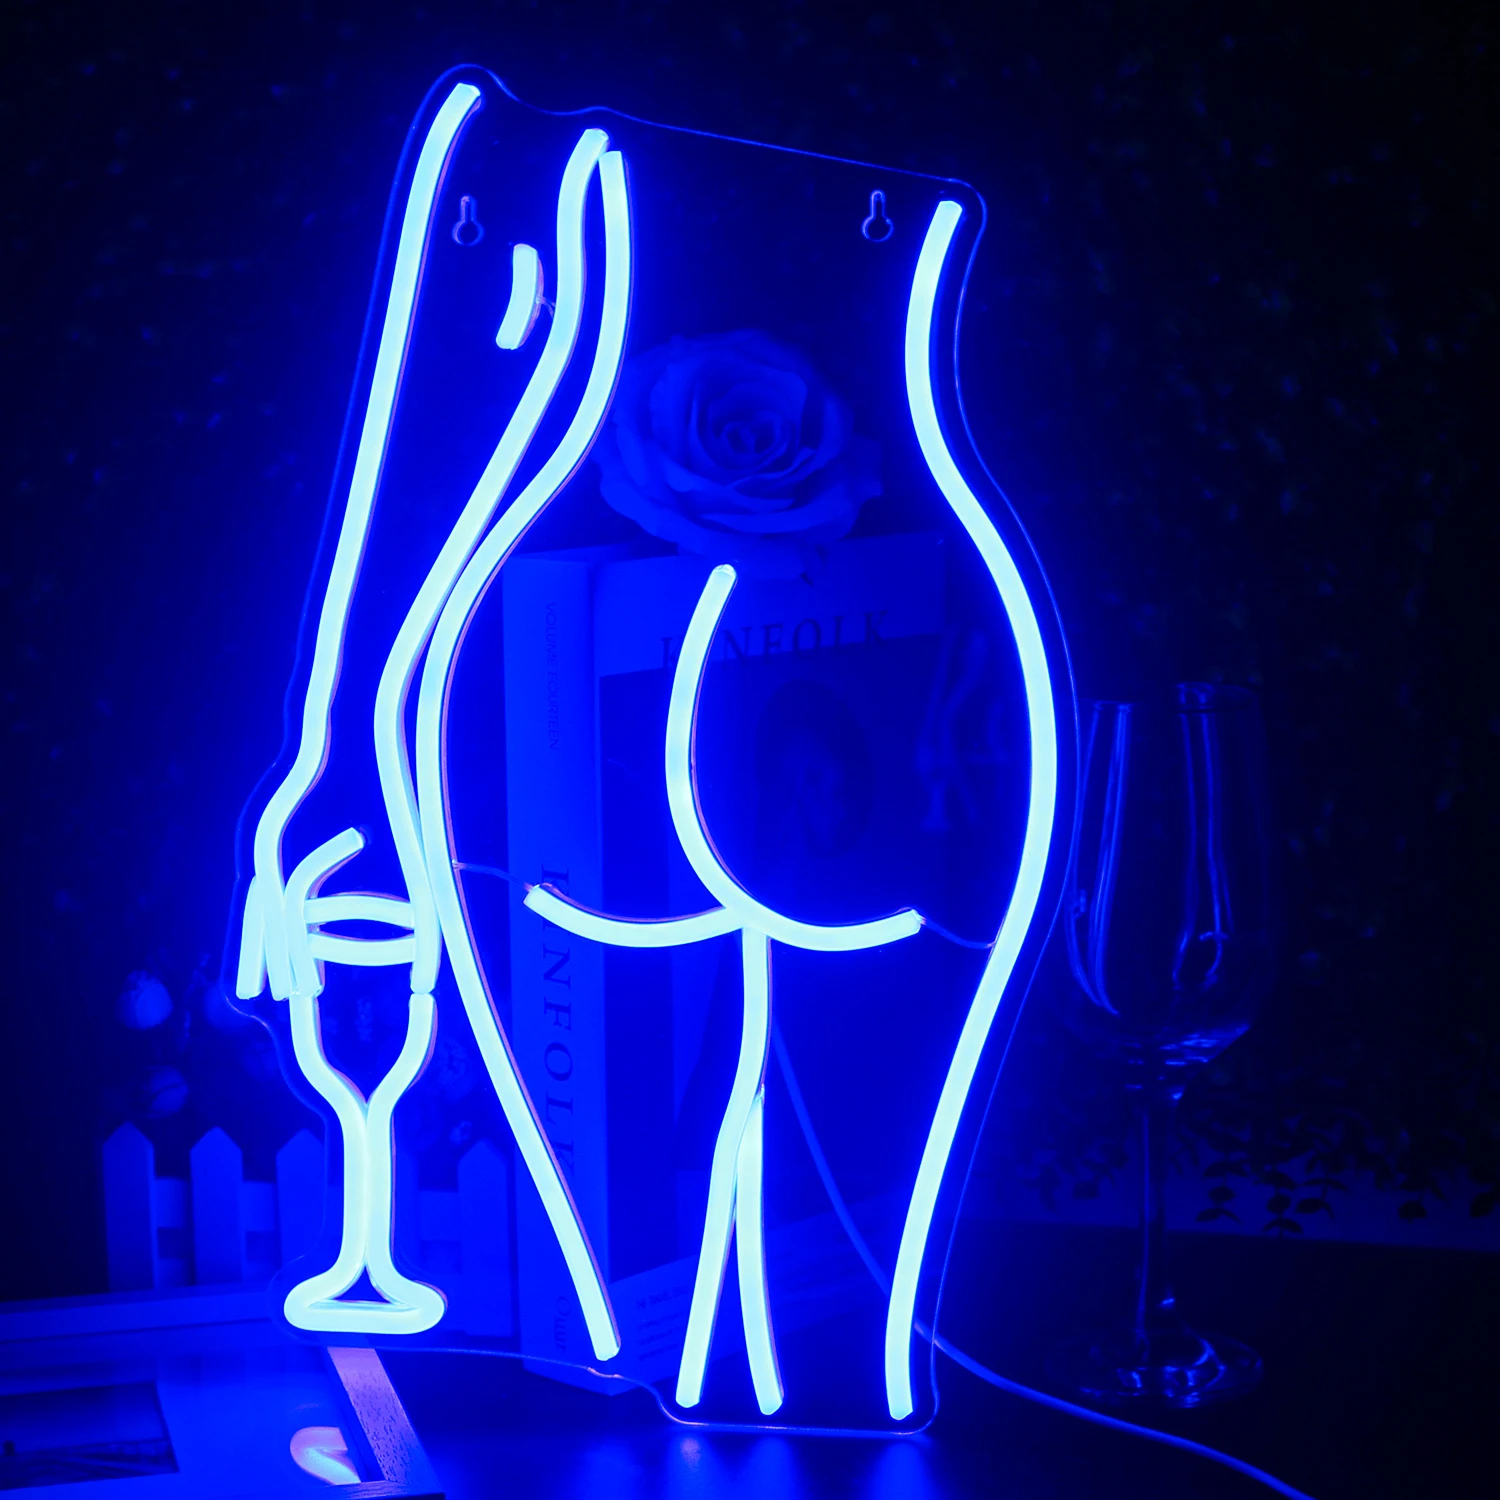 Ineonlife Sexy Lady Led Neon Light Sign Female Blue Led Neon For Bar Decor Light Home Room Decor Bar Party Wedding Wall Decor